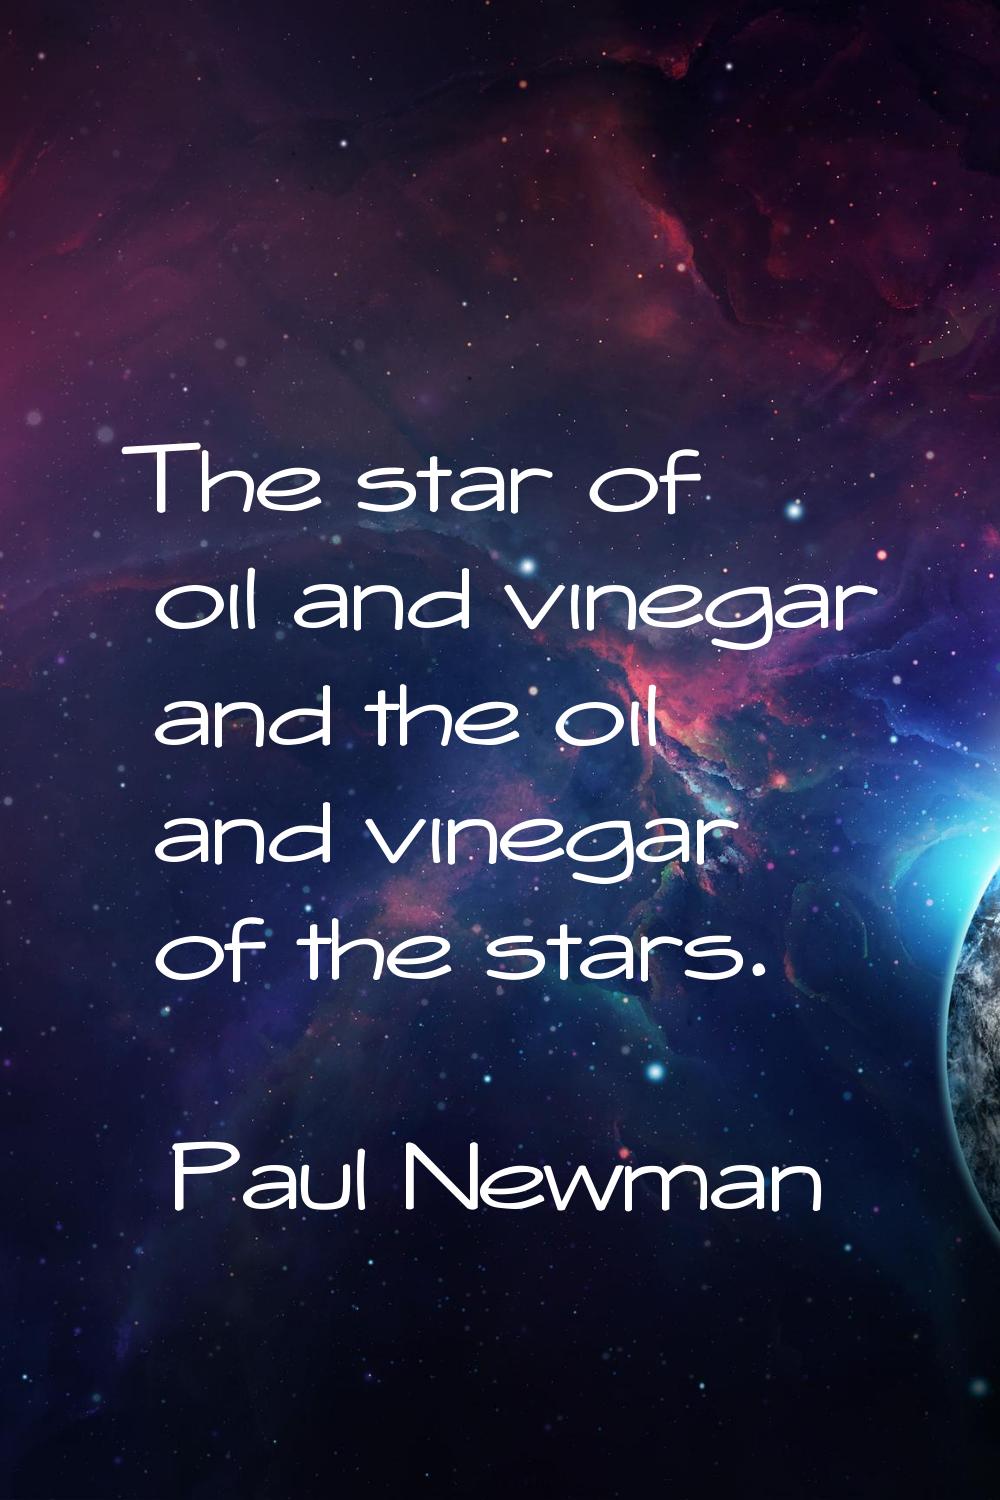 The star of oil and vinegar and the oil and vinegar of the stars.